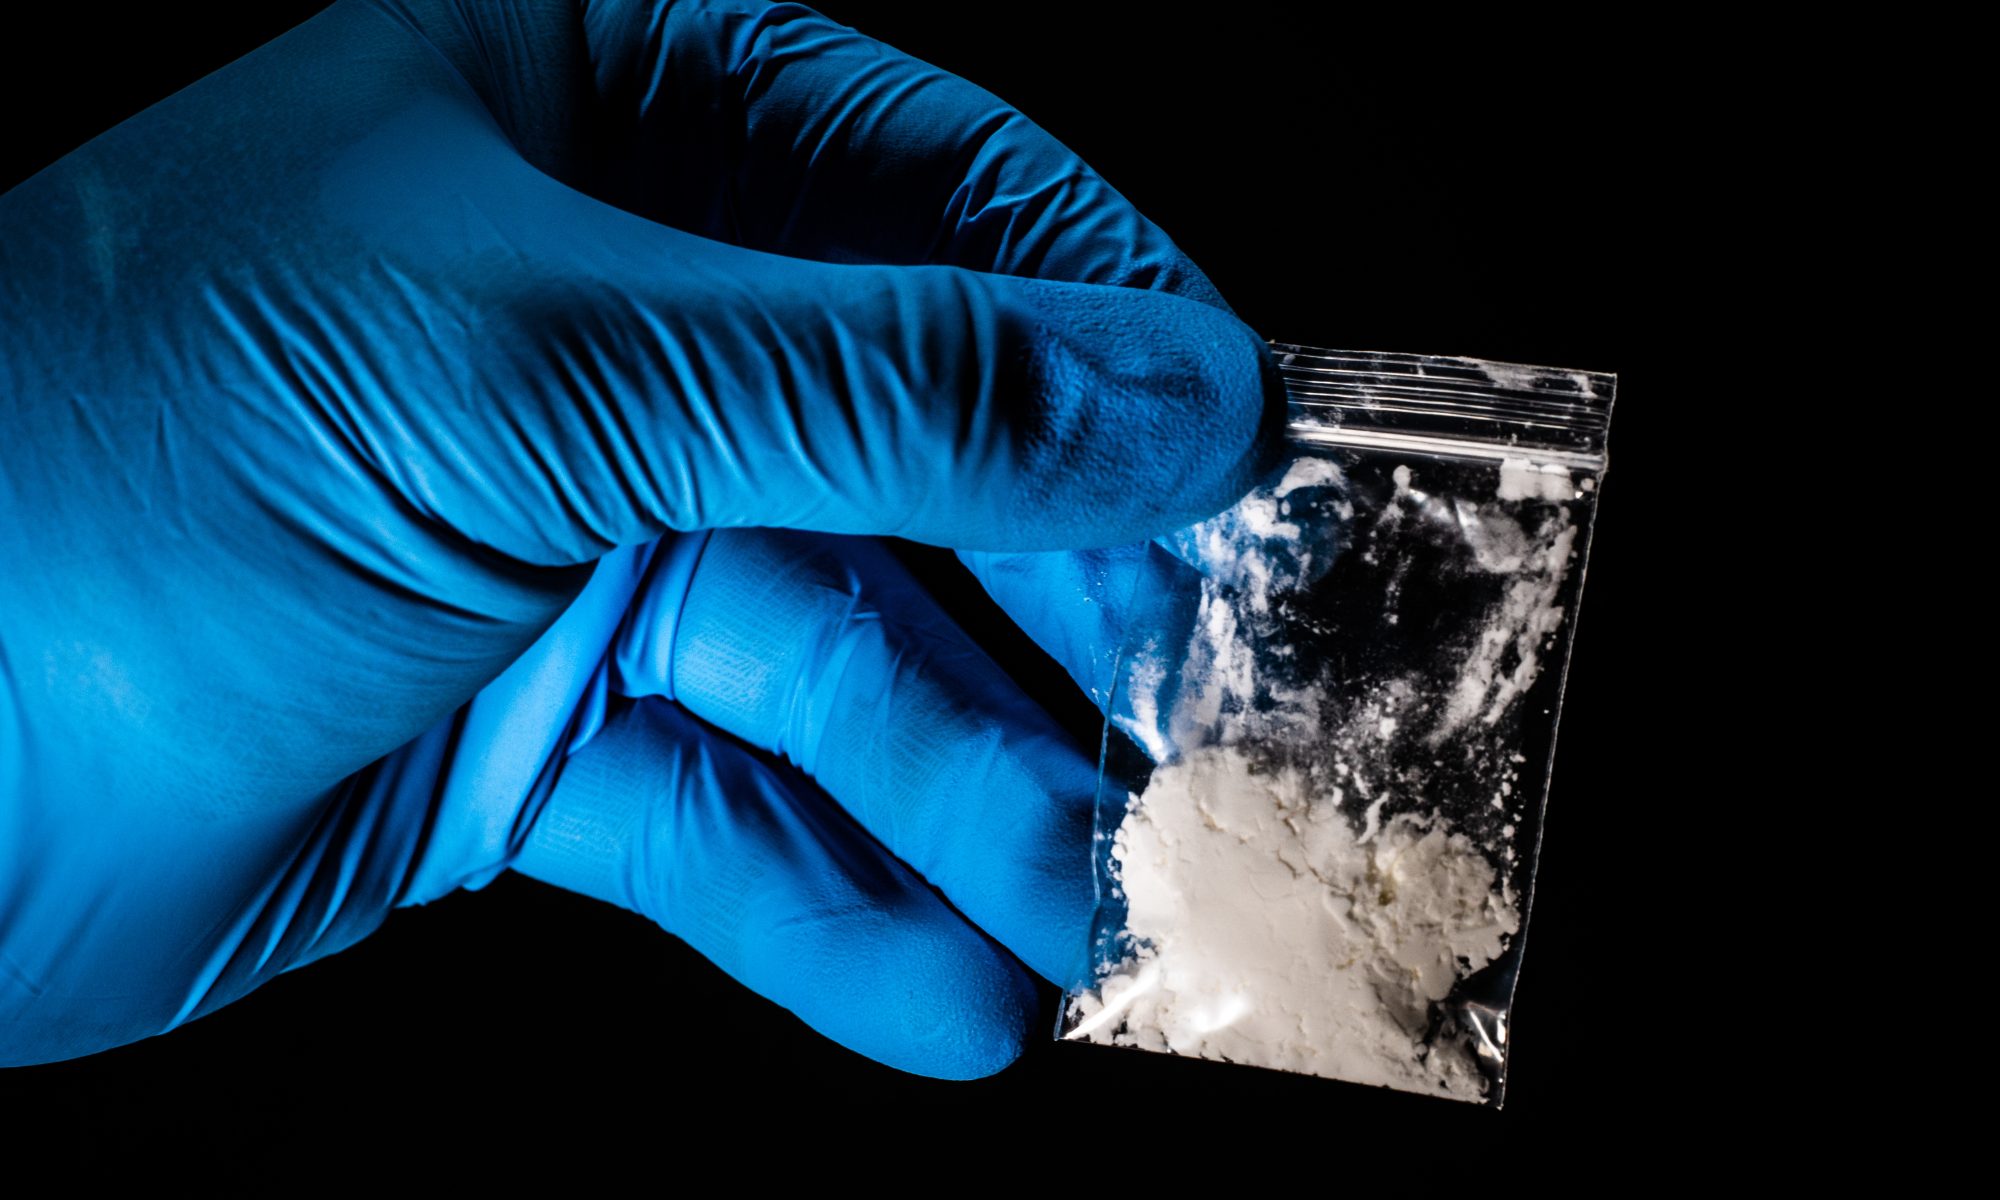 A gloved hands holds a plastic baggie of fentanyl.